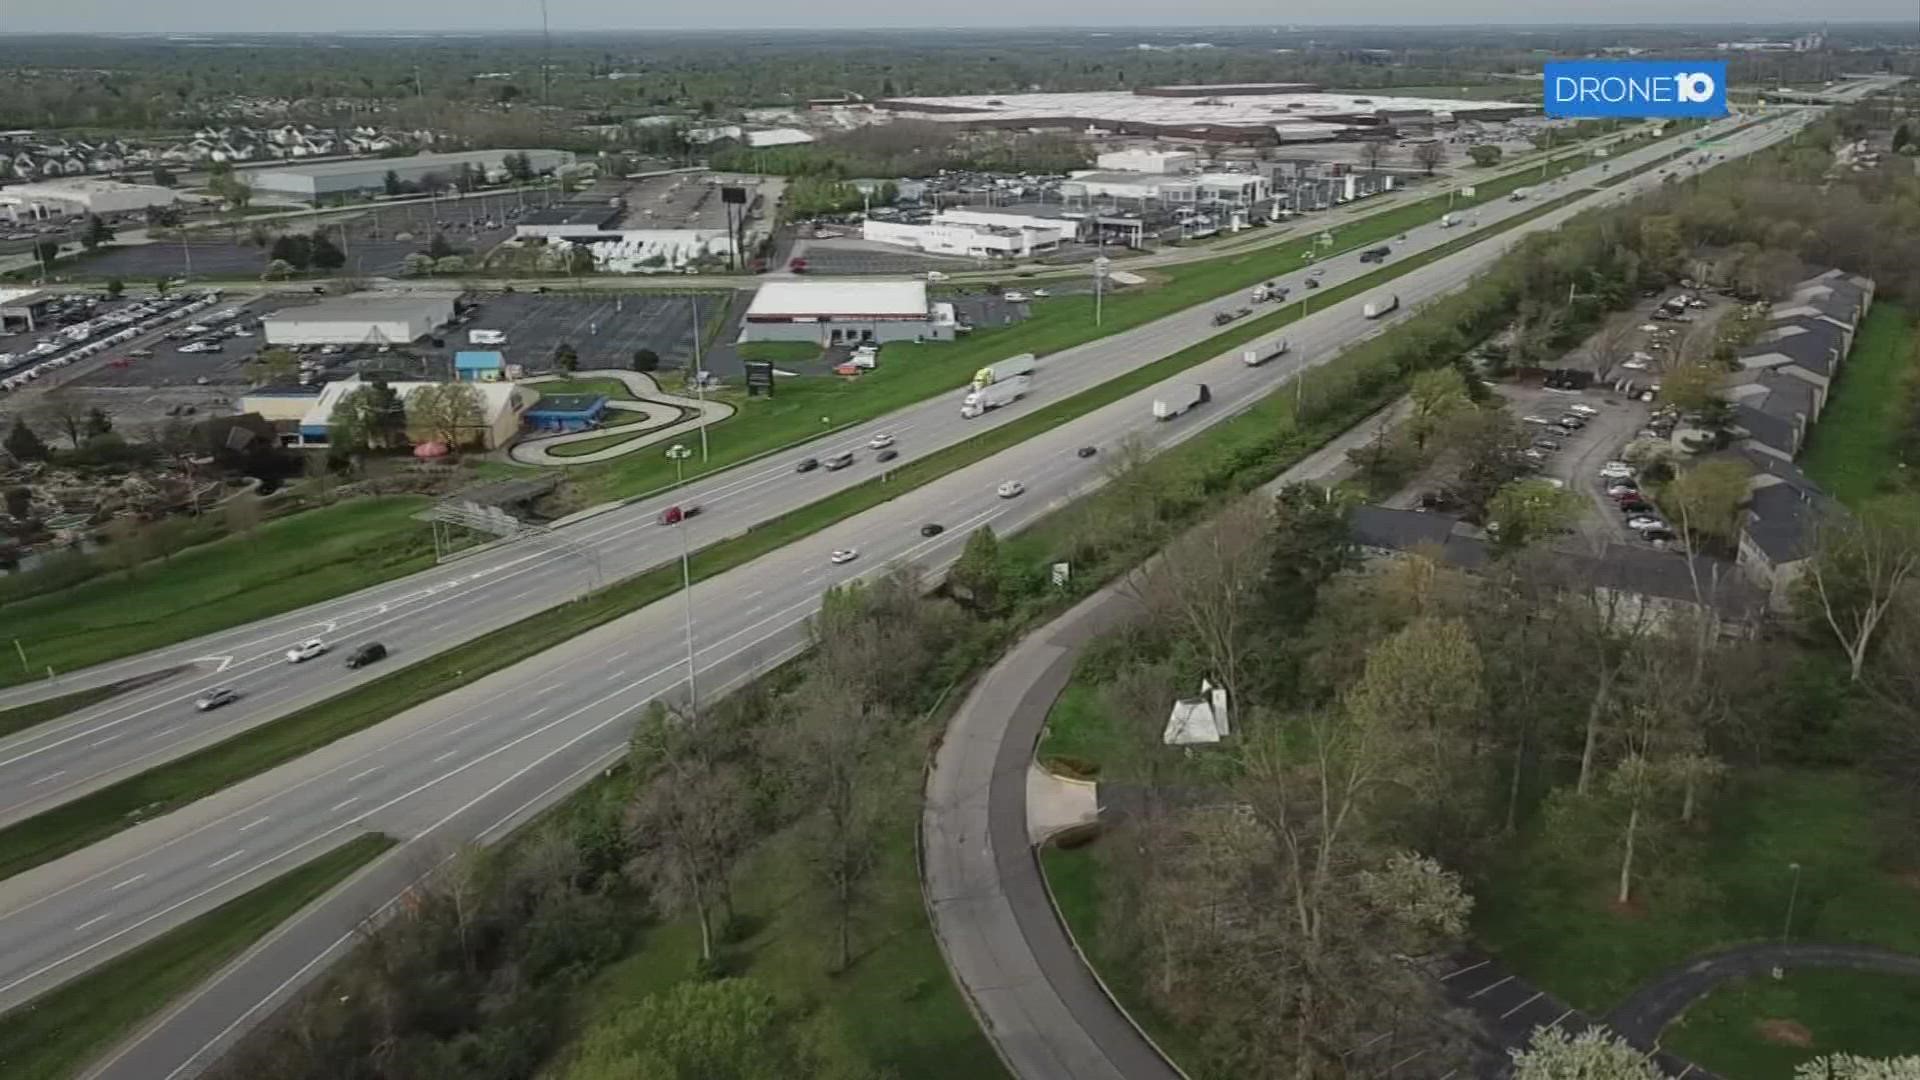 ODOT will start working on the stretches of I-70 on the East side of Columbus from I-270 to Brice Road in July 2022.